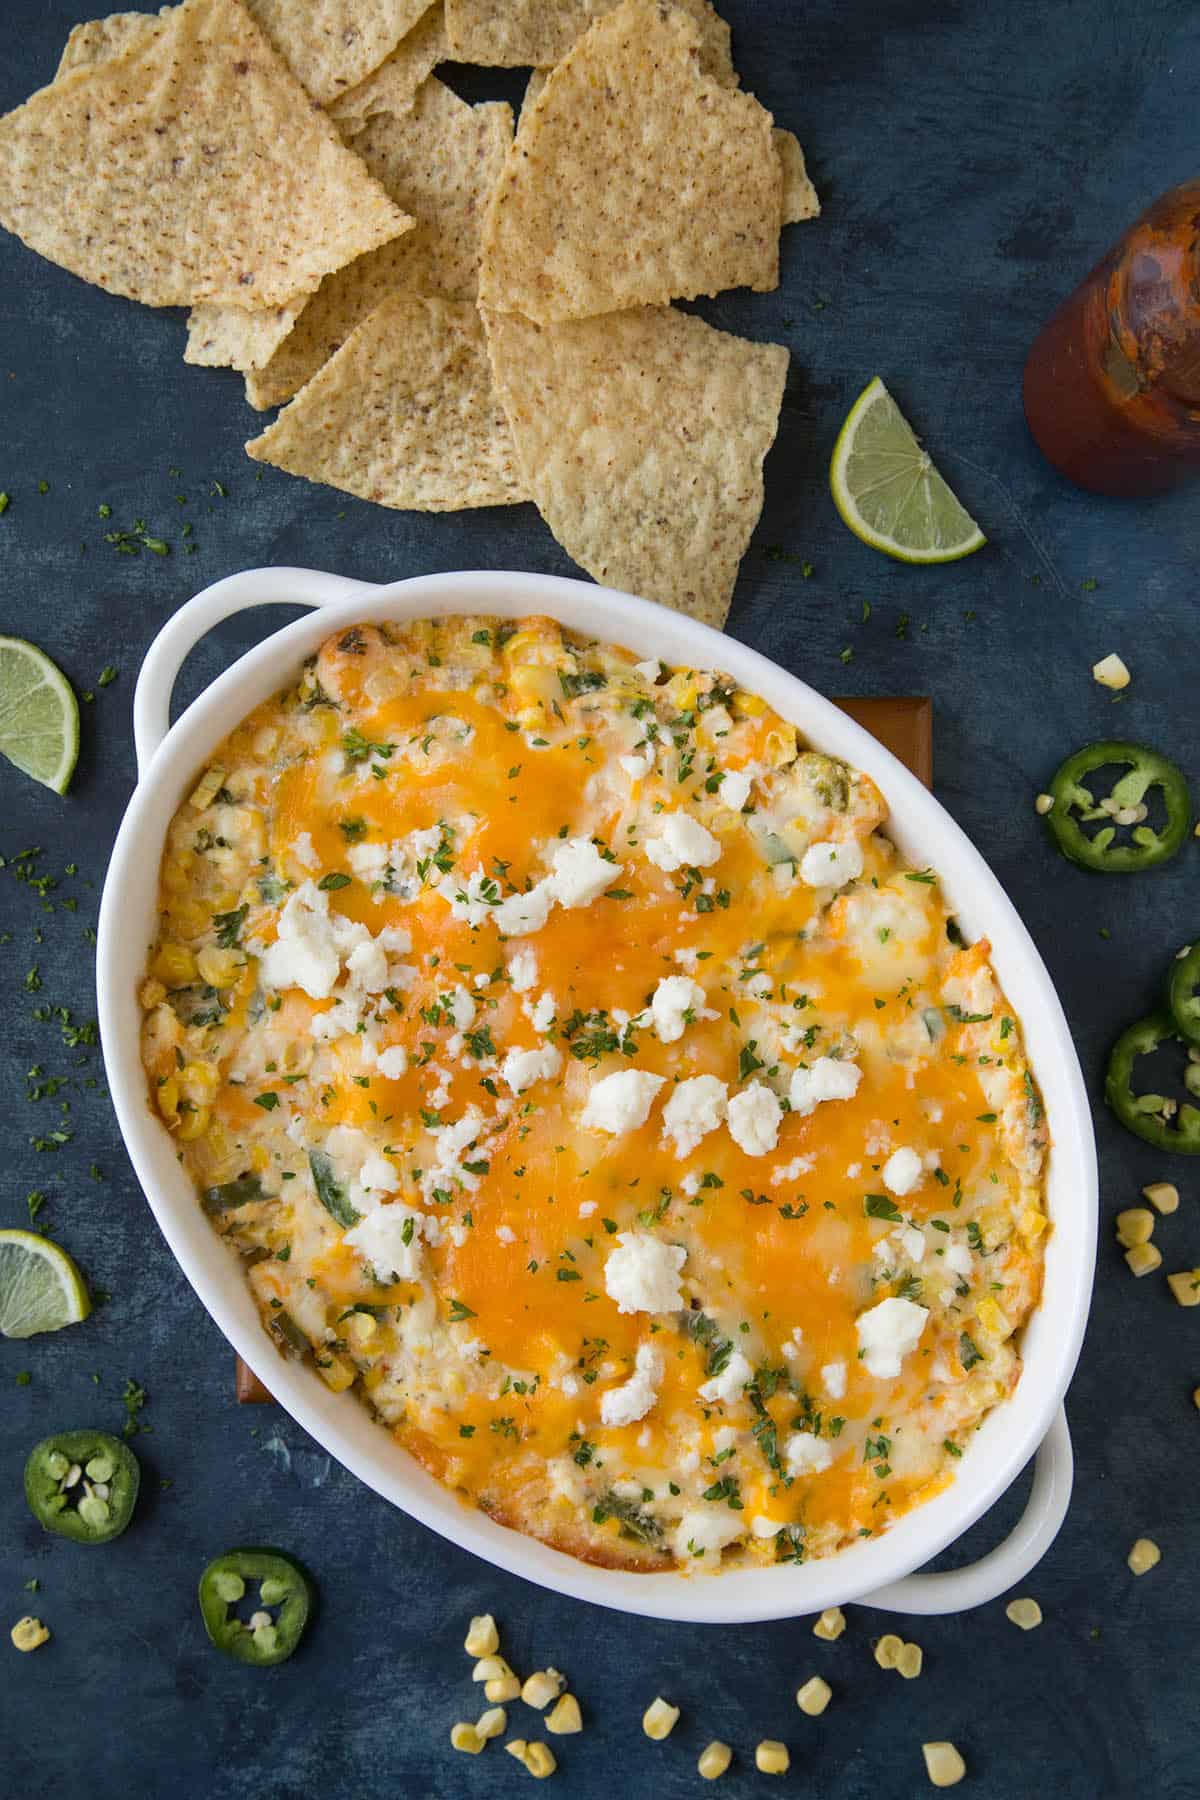 This Mexican Corn Dip is read to serve!